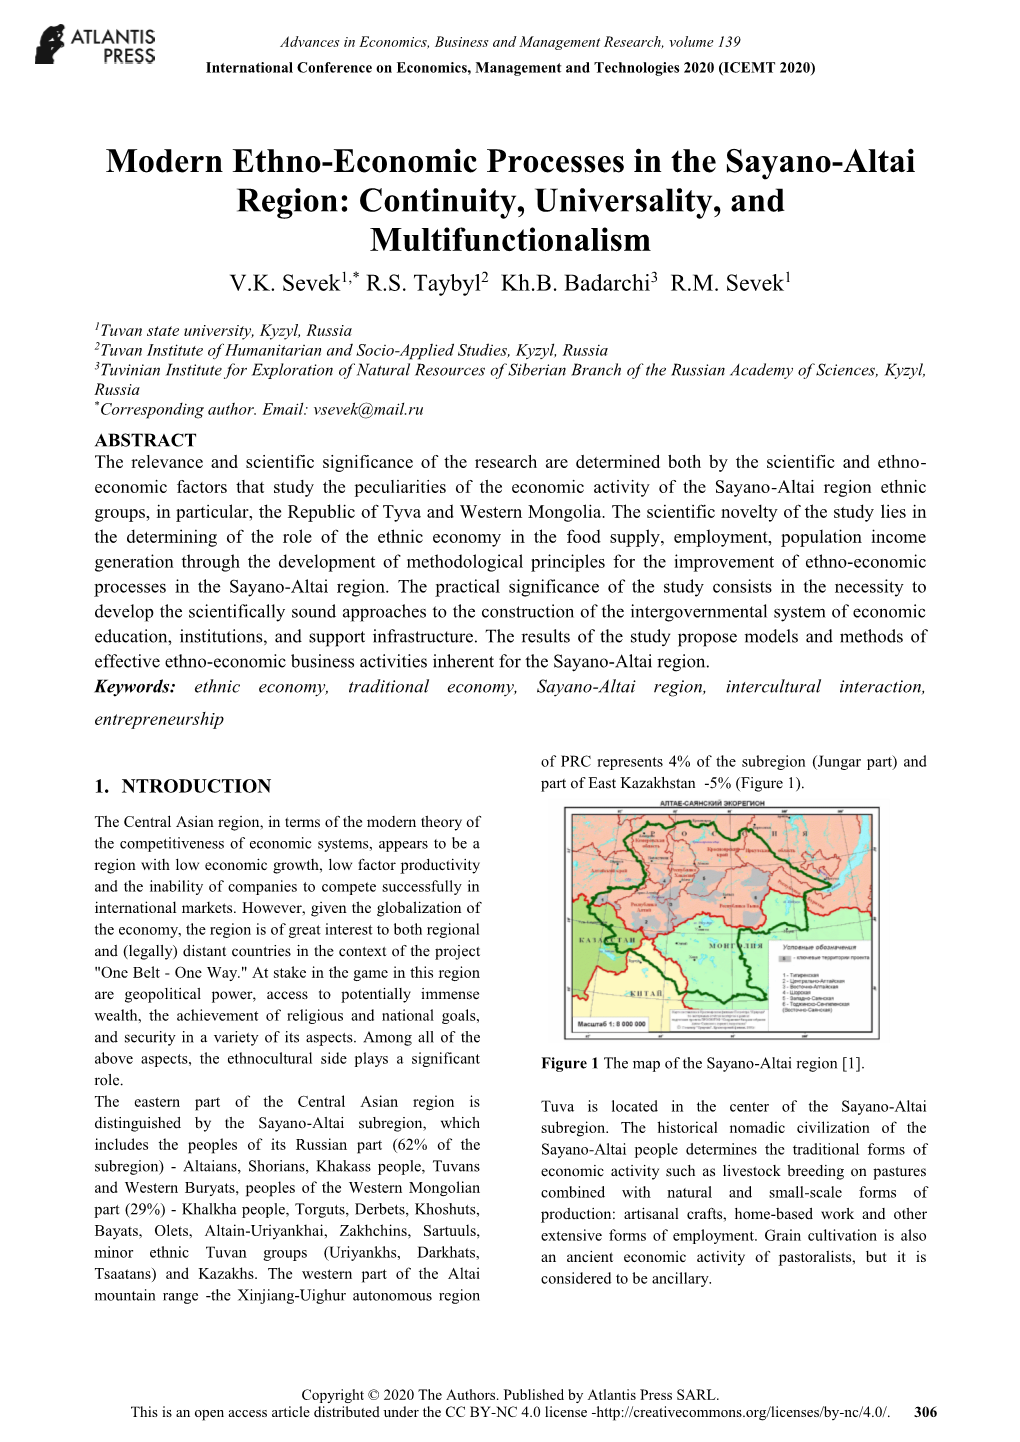 Modern Ethno-Economic Processes in the Sayano-Altai Region: Continuity, Universality, and Multifunctionalism V.K